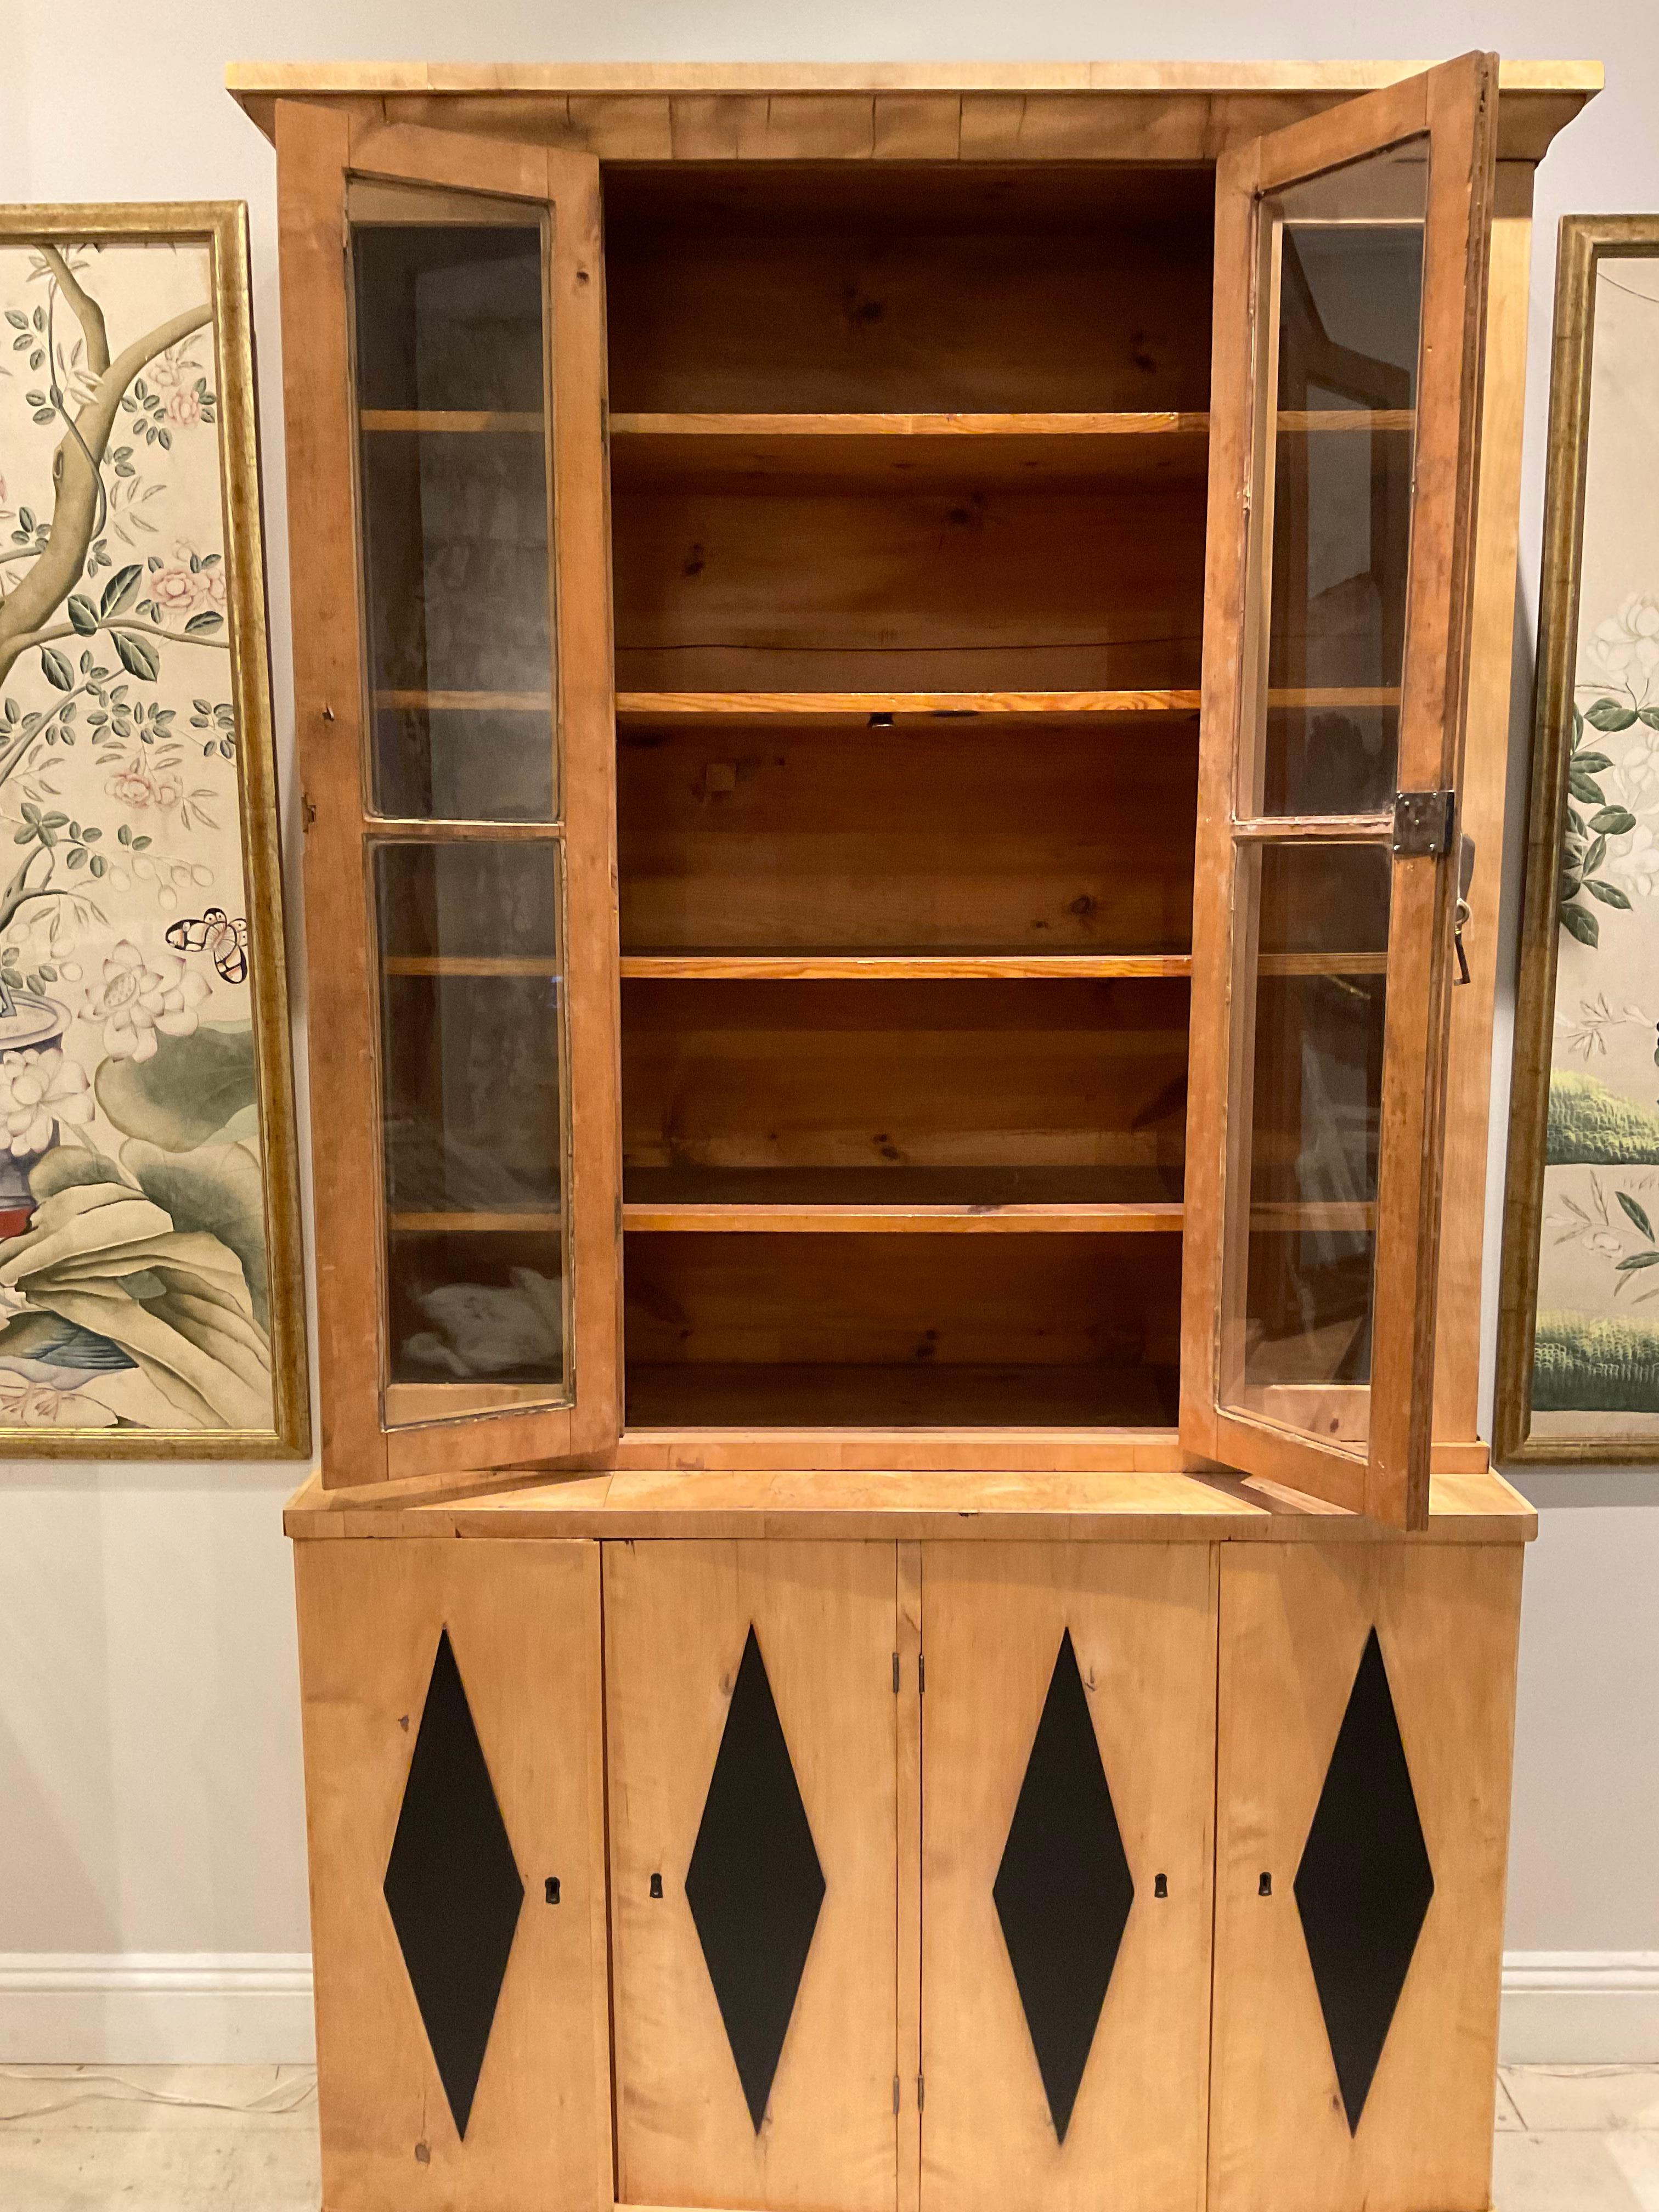 Swedish C19th Bookcase from Sweden with glazed top and decorative diamond detail to base